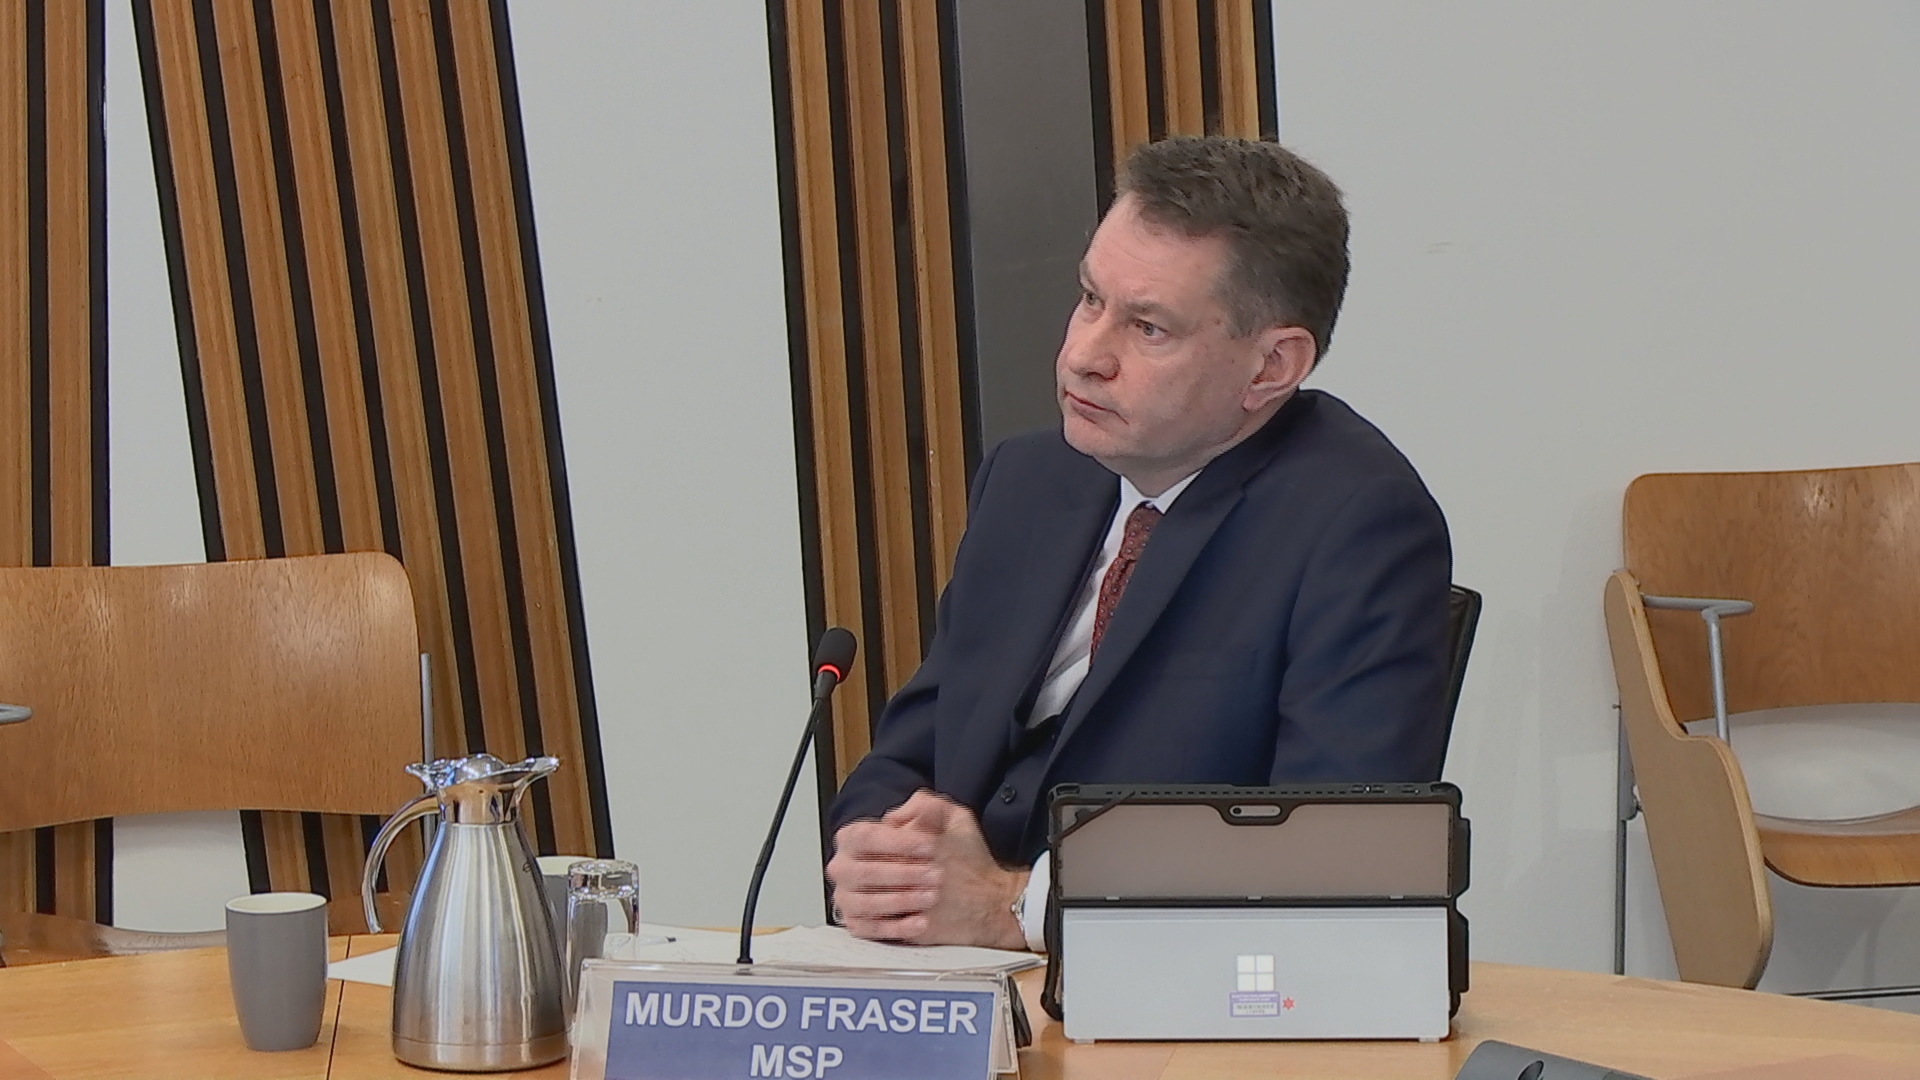 Scottish Conservative MSP Murdo Fraser questioned the extension of emergency powers. (Scottish Parliament TV)